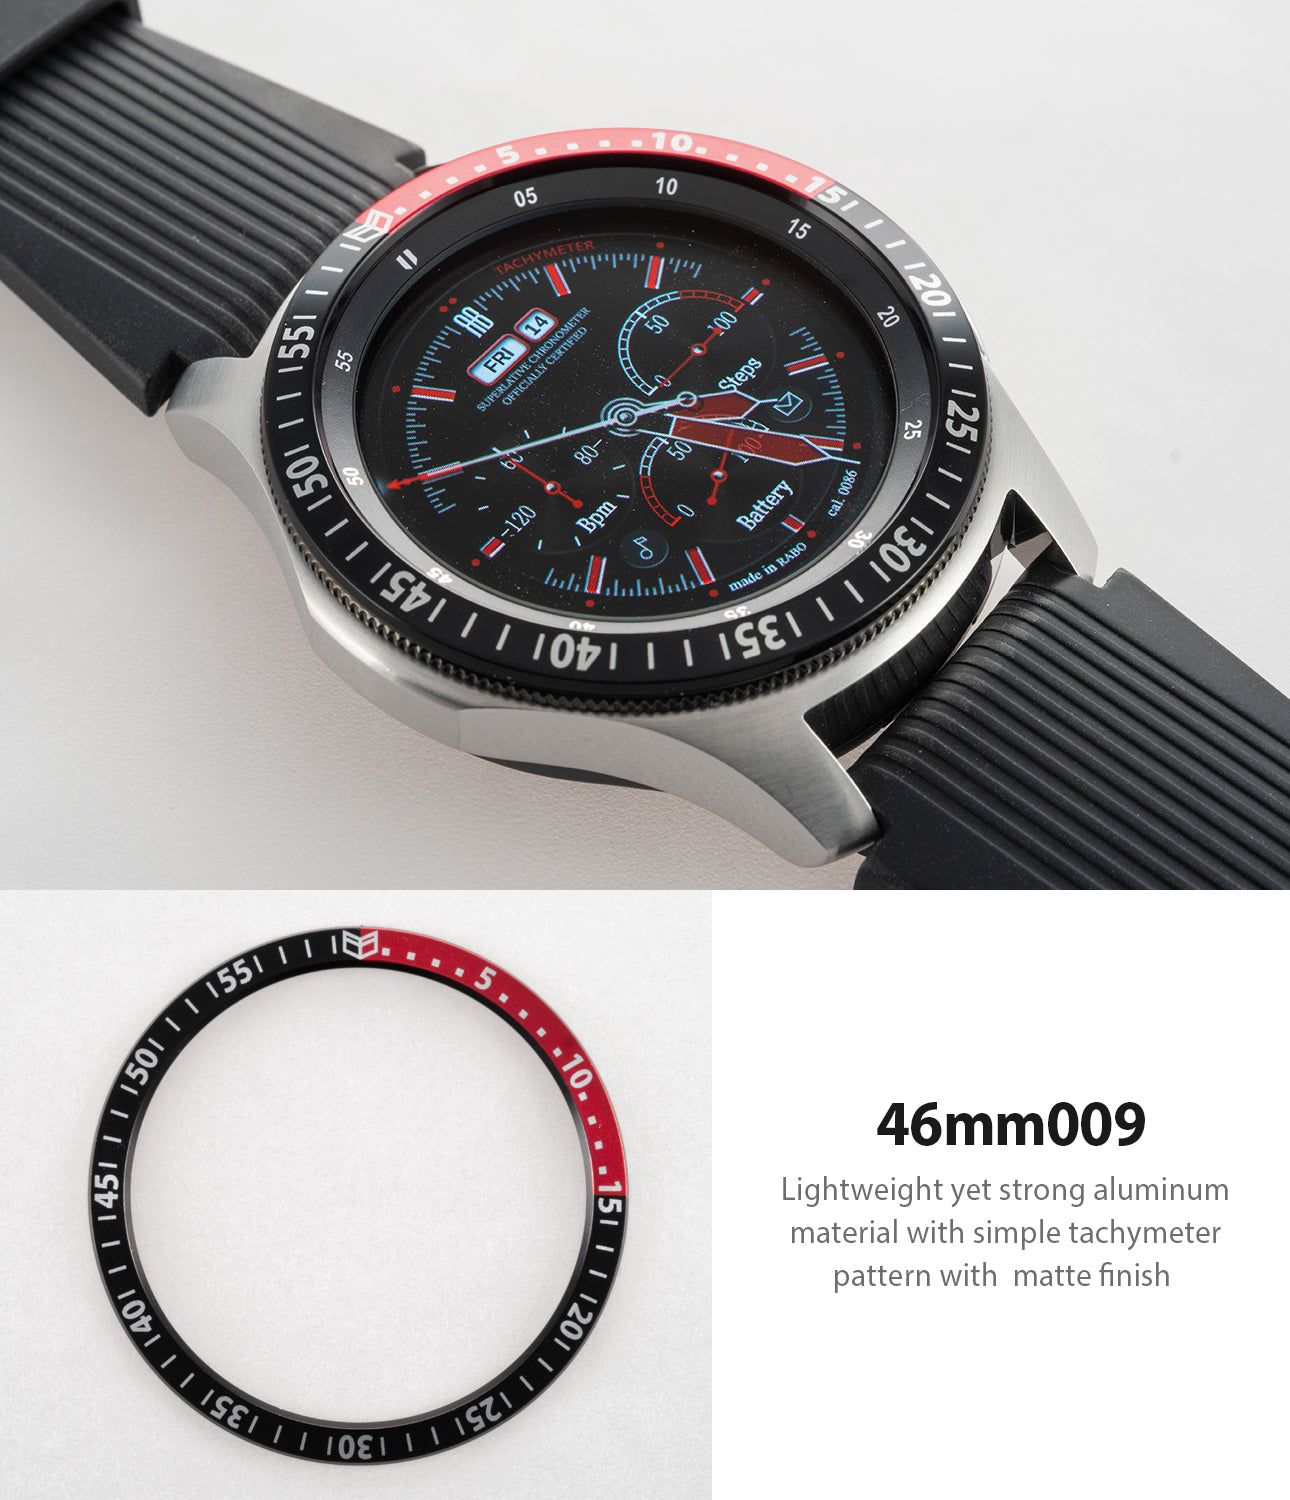 lightweight yet strong aluminum material with simple tachymeter pattern with matte finish